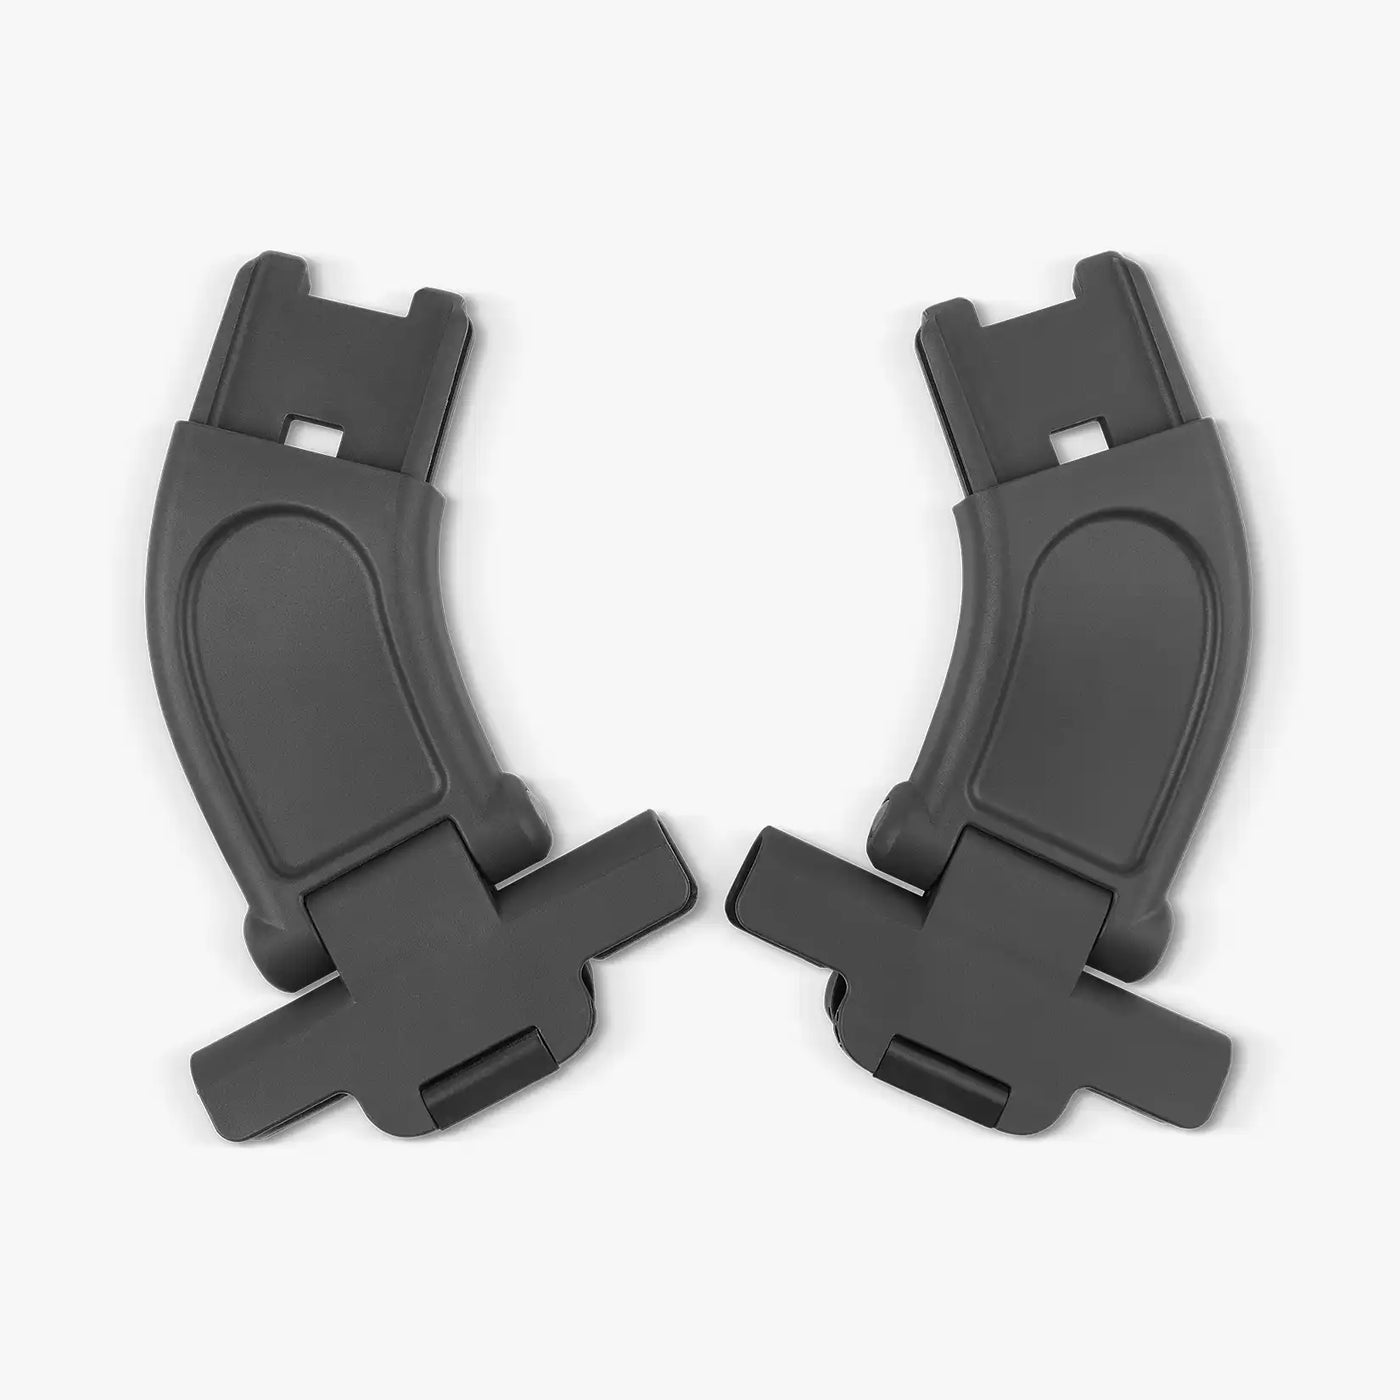 UPPAbaby Minu Adapter for MESA Car Seat and Carrycot